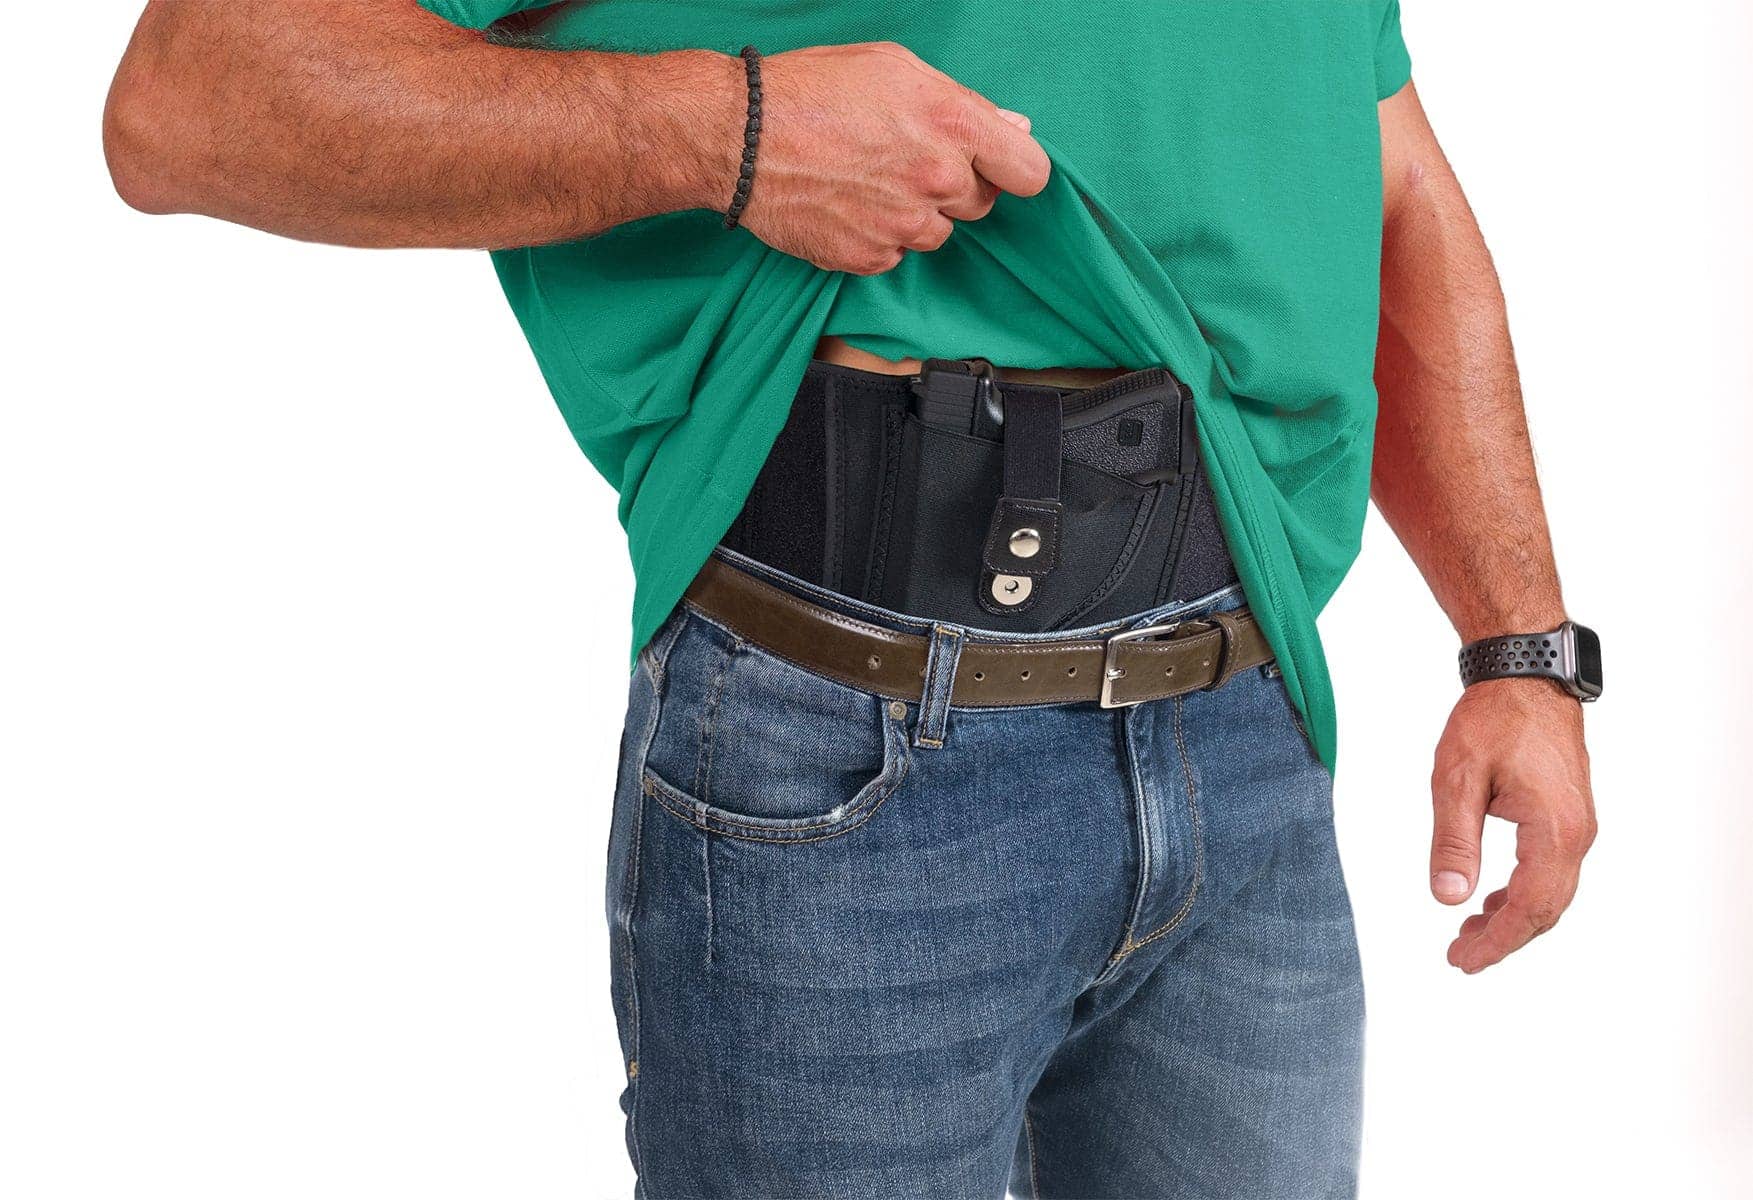 Concealed Carry Ultimate Belly Band Holster Pistol Holster, Shop Today.  Get it Tomorrow!